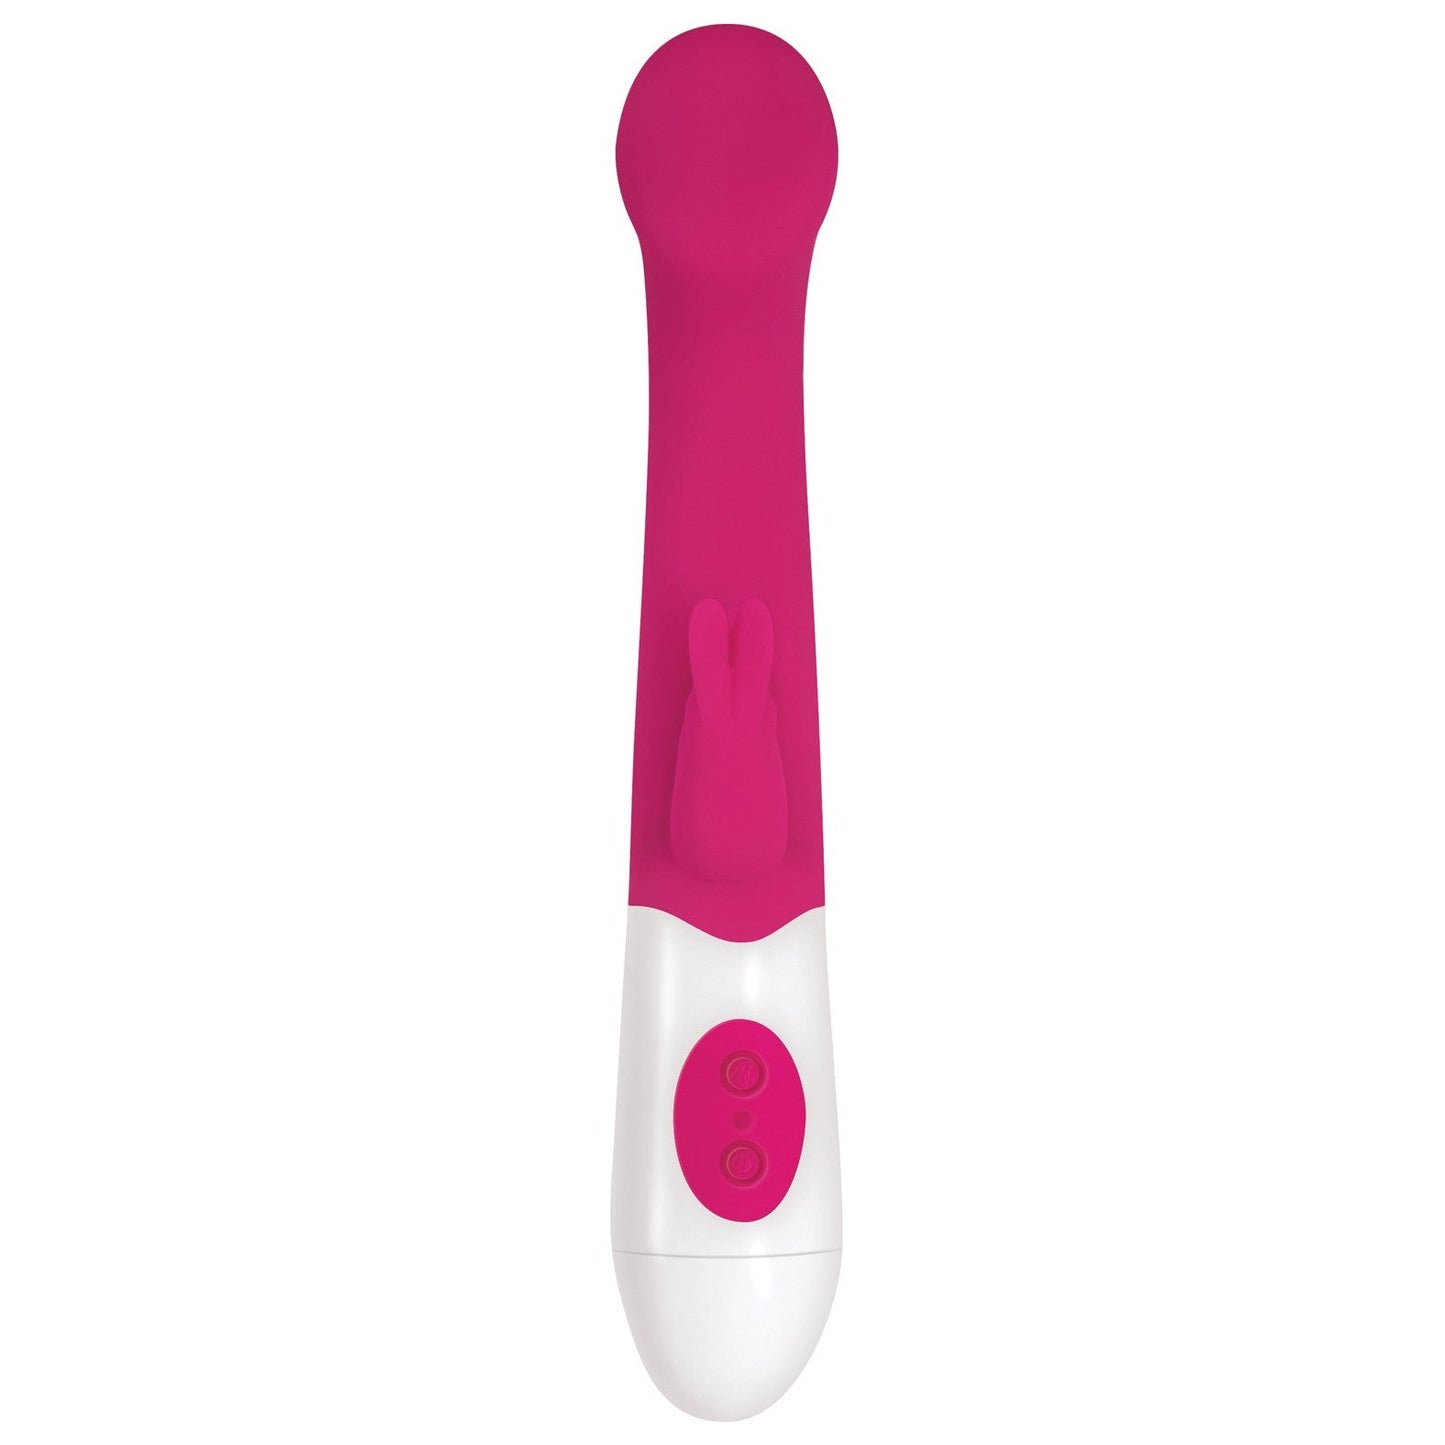 Adam & Eve Bunny Love Silicone  G-bliss O-maker - Pink